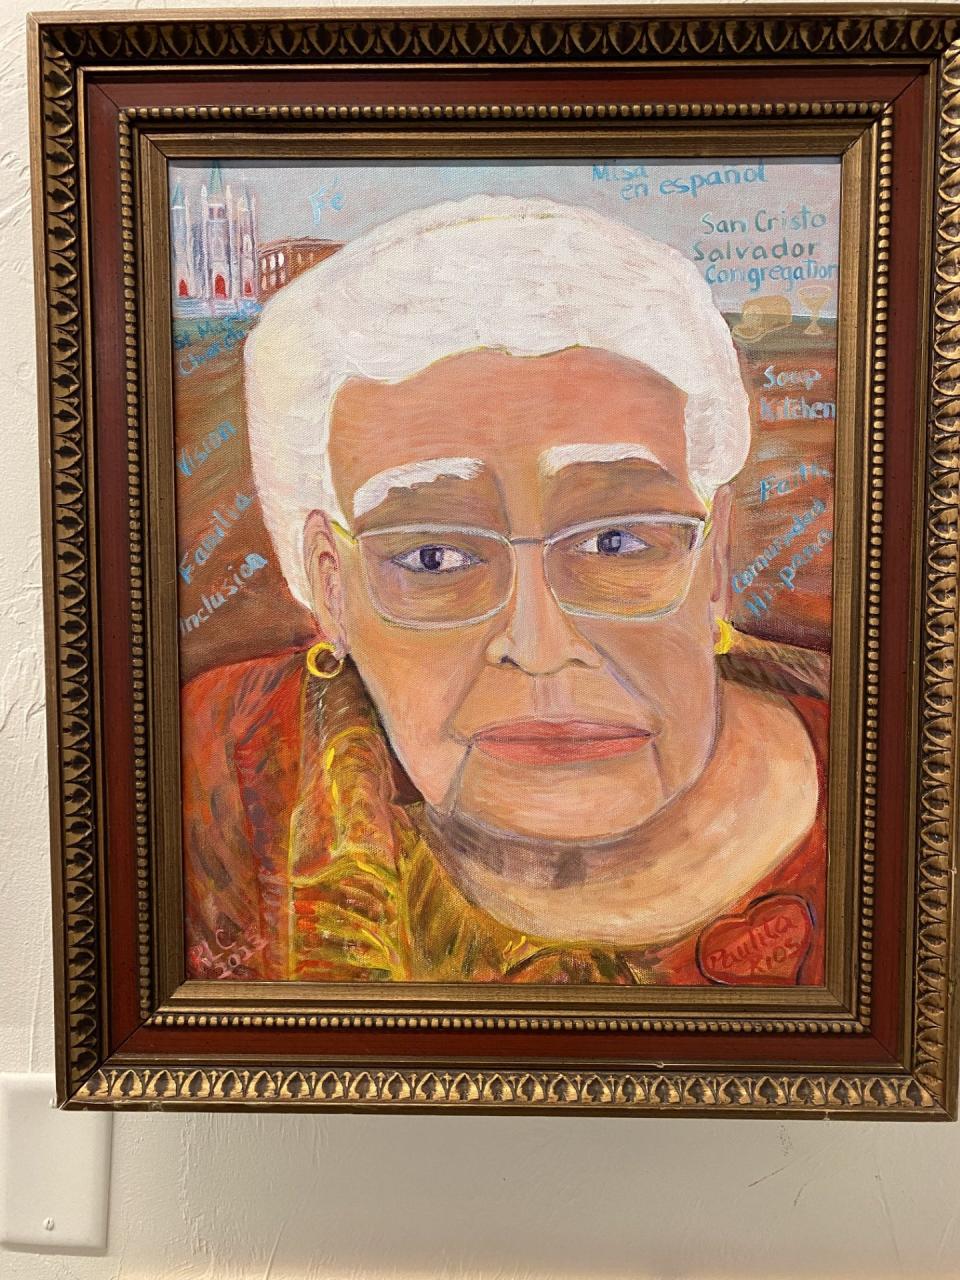 Paulita Rios was an effective York community leader for decades before her death in 2015 at the age of 99. Jose Santiago, himself a community leader, said of his grandmother in a York Daily Record story: “I am the grandson of Paulita Rios who was the founder of San Cristo Salvador Church on the 200 block of South Street in York city. That church had one of the first soup kitchens in York, which fed many people in the community daily including weekends. We have a history of working to help friends and community as a family, and this was instilled in myself and my sister at a very young age.” The York County History Center commissioned Rosa Luz Catterall to create this portrait of Paulita Rios for its new West Philadelphia Street museum, set to open in June 2024.